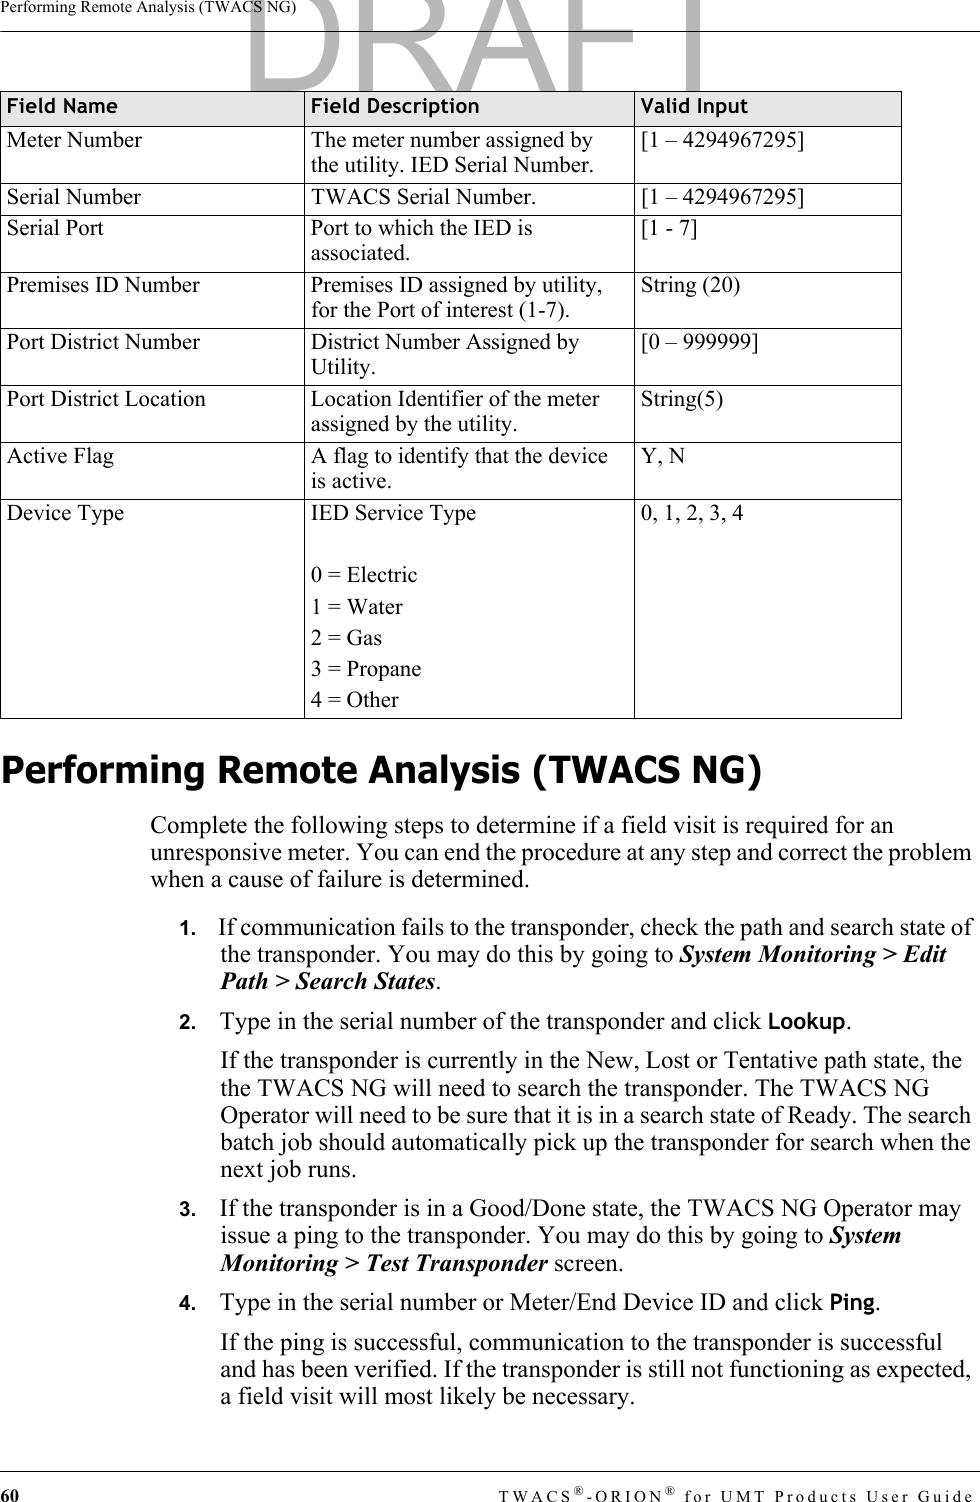 60 TWACS®-ORION® for UMT Products User GuidePerforming Remote Analysis (TWACS NG)Performing Remote Analysis (TWACS NG)Complete the following steps to determine if a field visit is required for an unresponsive meter. You can end the procedure at any step and correct the problem when a cause of failure is determined.1.   If communication fails to the transponder, check the path and search state of the transponder. You may do this by going to System Monitoring &gt; Edit Path &gt; Search States.2.   Type in the serial number of the transponder and click Lookup.If the transponder is currently in the New, Lost or Tentative path state, the the TWACS NG will need to search the transponder. The TWACS NG Operator will need to be sure that it is in a search state of Ready. The search batch job should automatically pick up the transponder for search when the next job runs.3.   If the transponder is in a Good/Done state, the TWACS NG Operator may issue a ping to the transponder. You may do this by going to System Monitoring &gt; Test Transponder screen.4.   Type in the serial number or Meter/End Device ID and click Ping.If the ping is successful, communication to the transponder is successful and has been verified. If the transponder is still not functioning as expected, a field visit will most likely be necessary.Meter Number The meter number assigned by the utility. IED Serial Number.[1 – 4294967295]Serial Number TWACS Serial Number. [1 – 4294967295]Serial Port Port to which the IED is associated.[1 - 7]Premises ID Number Premises ID assigned by utility, for the Port of interest (1-7).String (20)Port District Number District Number Assigned by Utility.[0 – 999999]Port District Location Location Identifier of the meter assigned by the utility.String(5)Active Flag A flag to identify that the device is active.Y, NDevice Type IED Service Type0 = Electric1 = Water2 = Gas3 = Propane4 = Other0, 1, 2, 3, 4Field Name Field Description Valid InputDRAFT